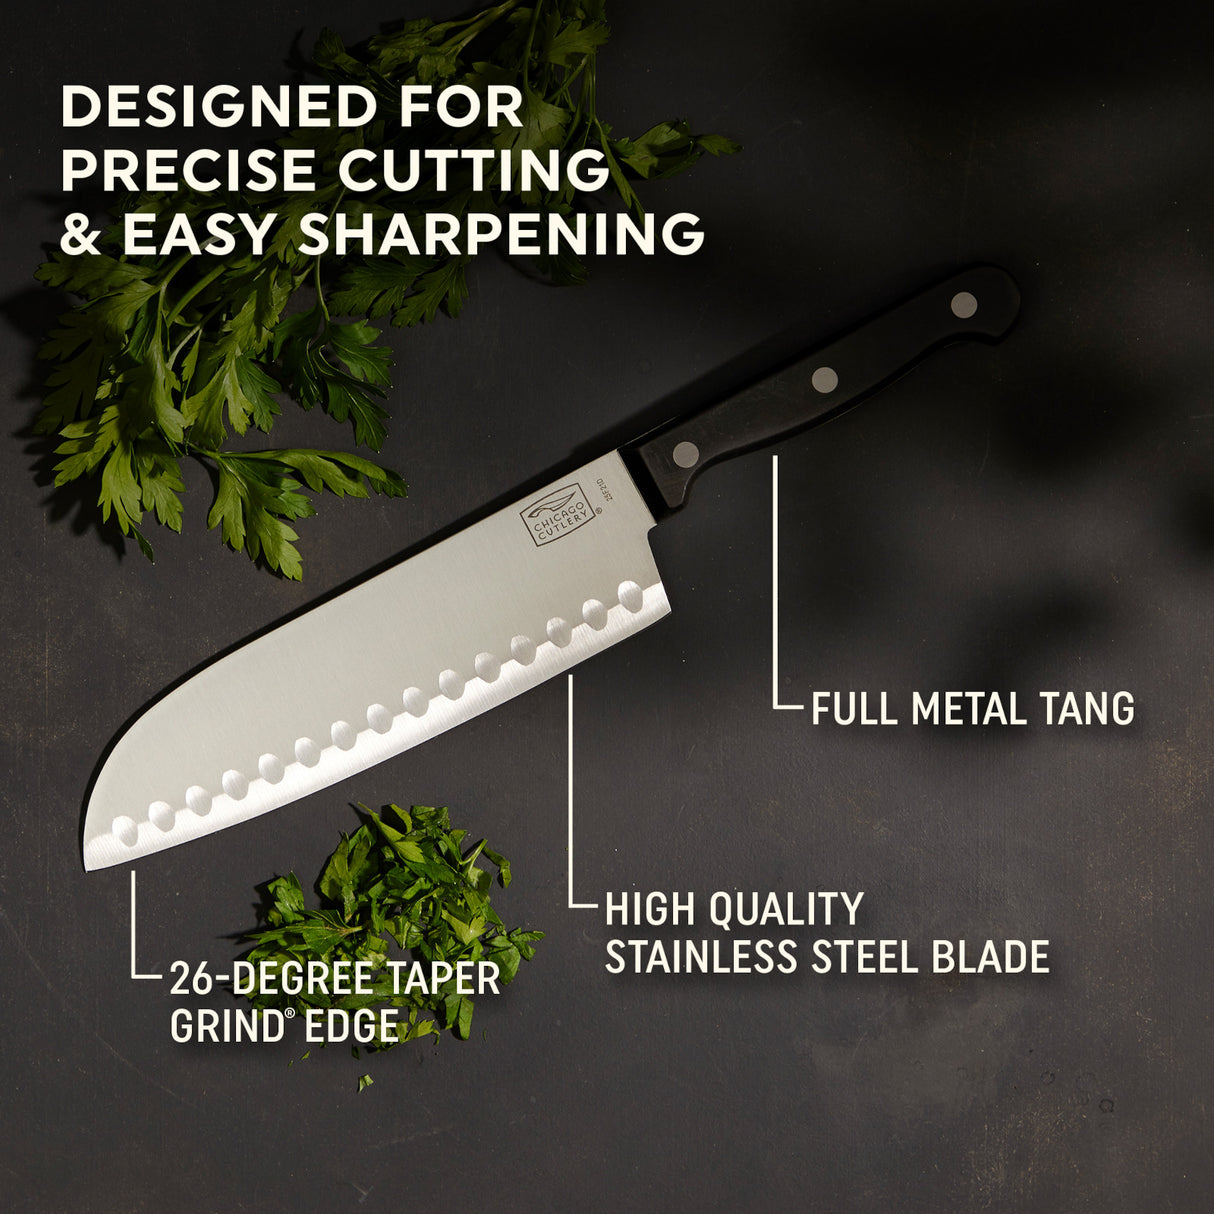 Essentials Partoku knife with text full metal tang, high quality stainless steel blade & 26-degree taper grind edge